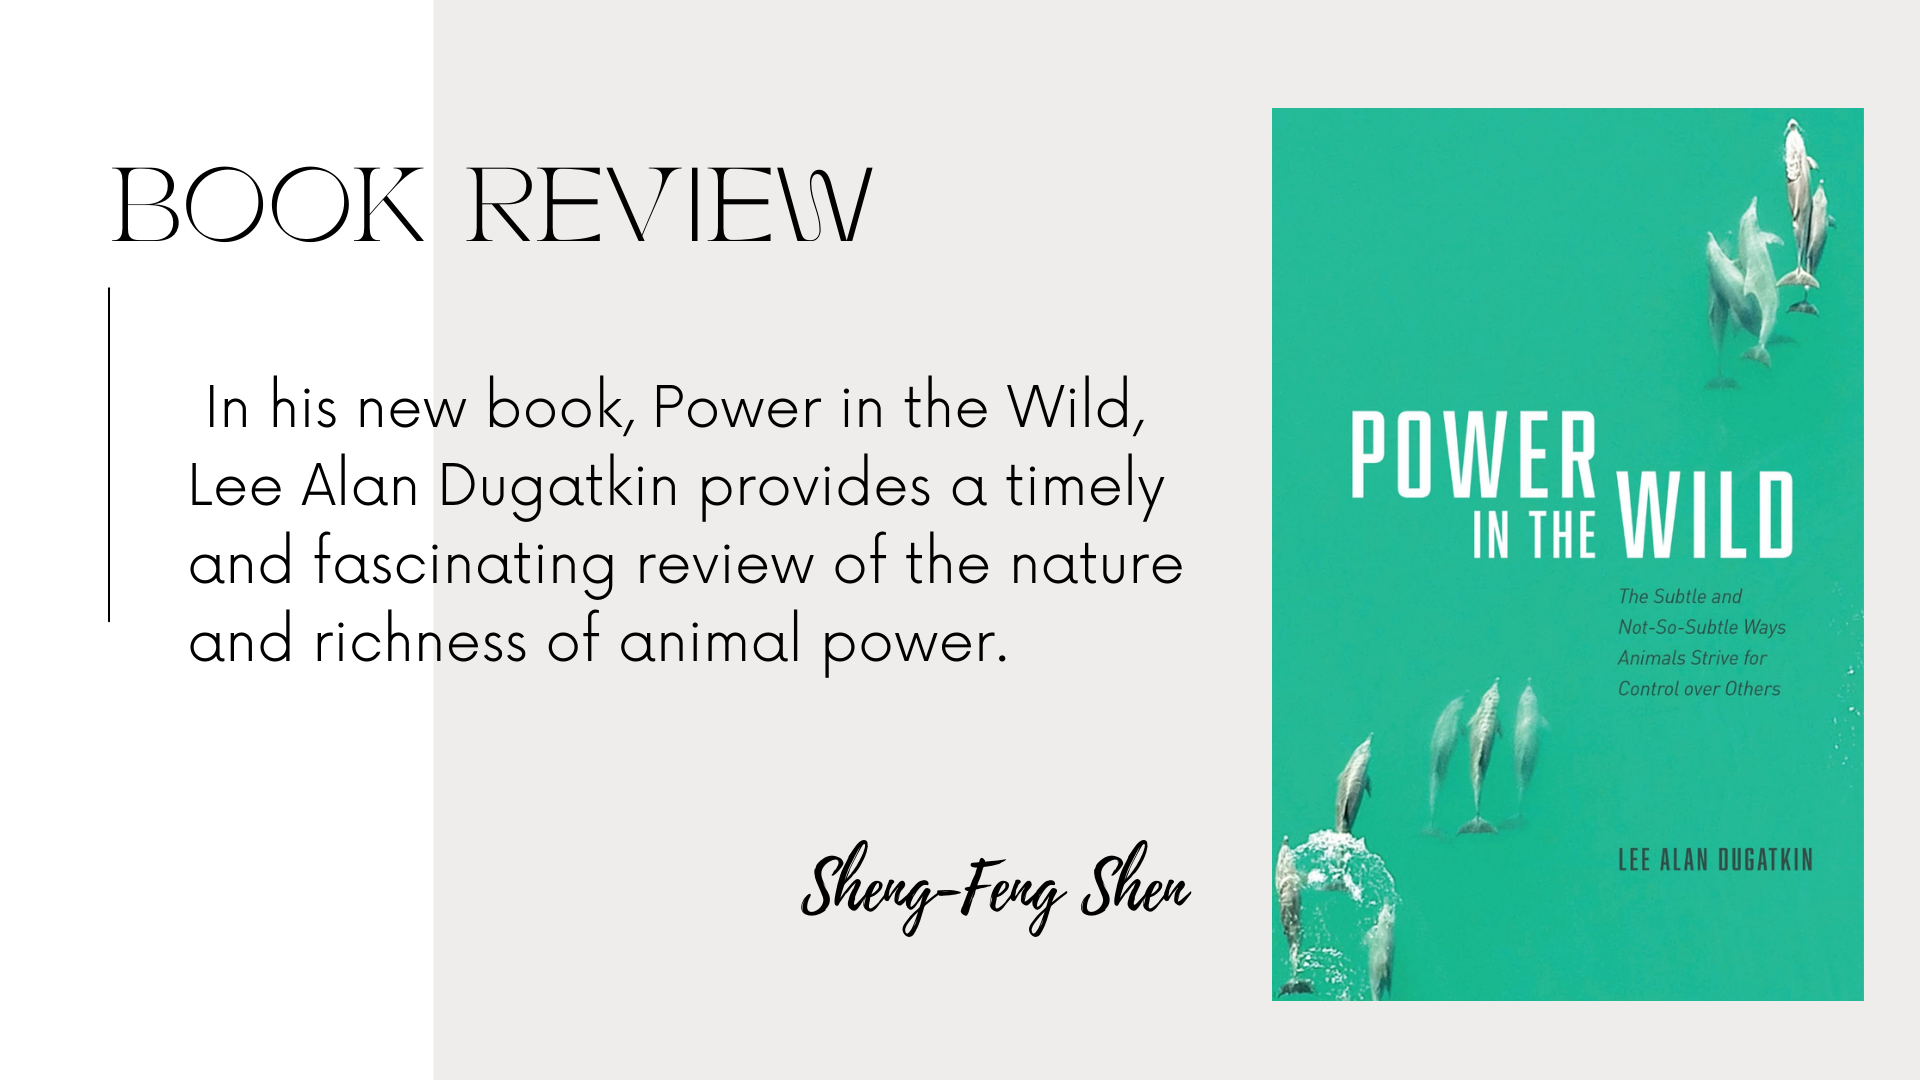 Book Recommendation: Power in the Wild